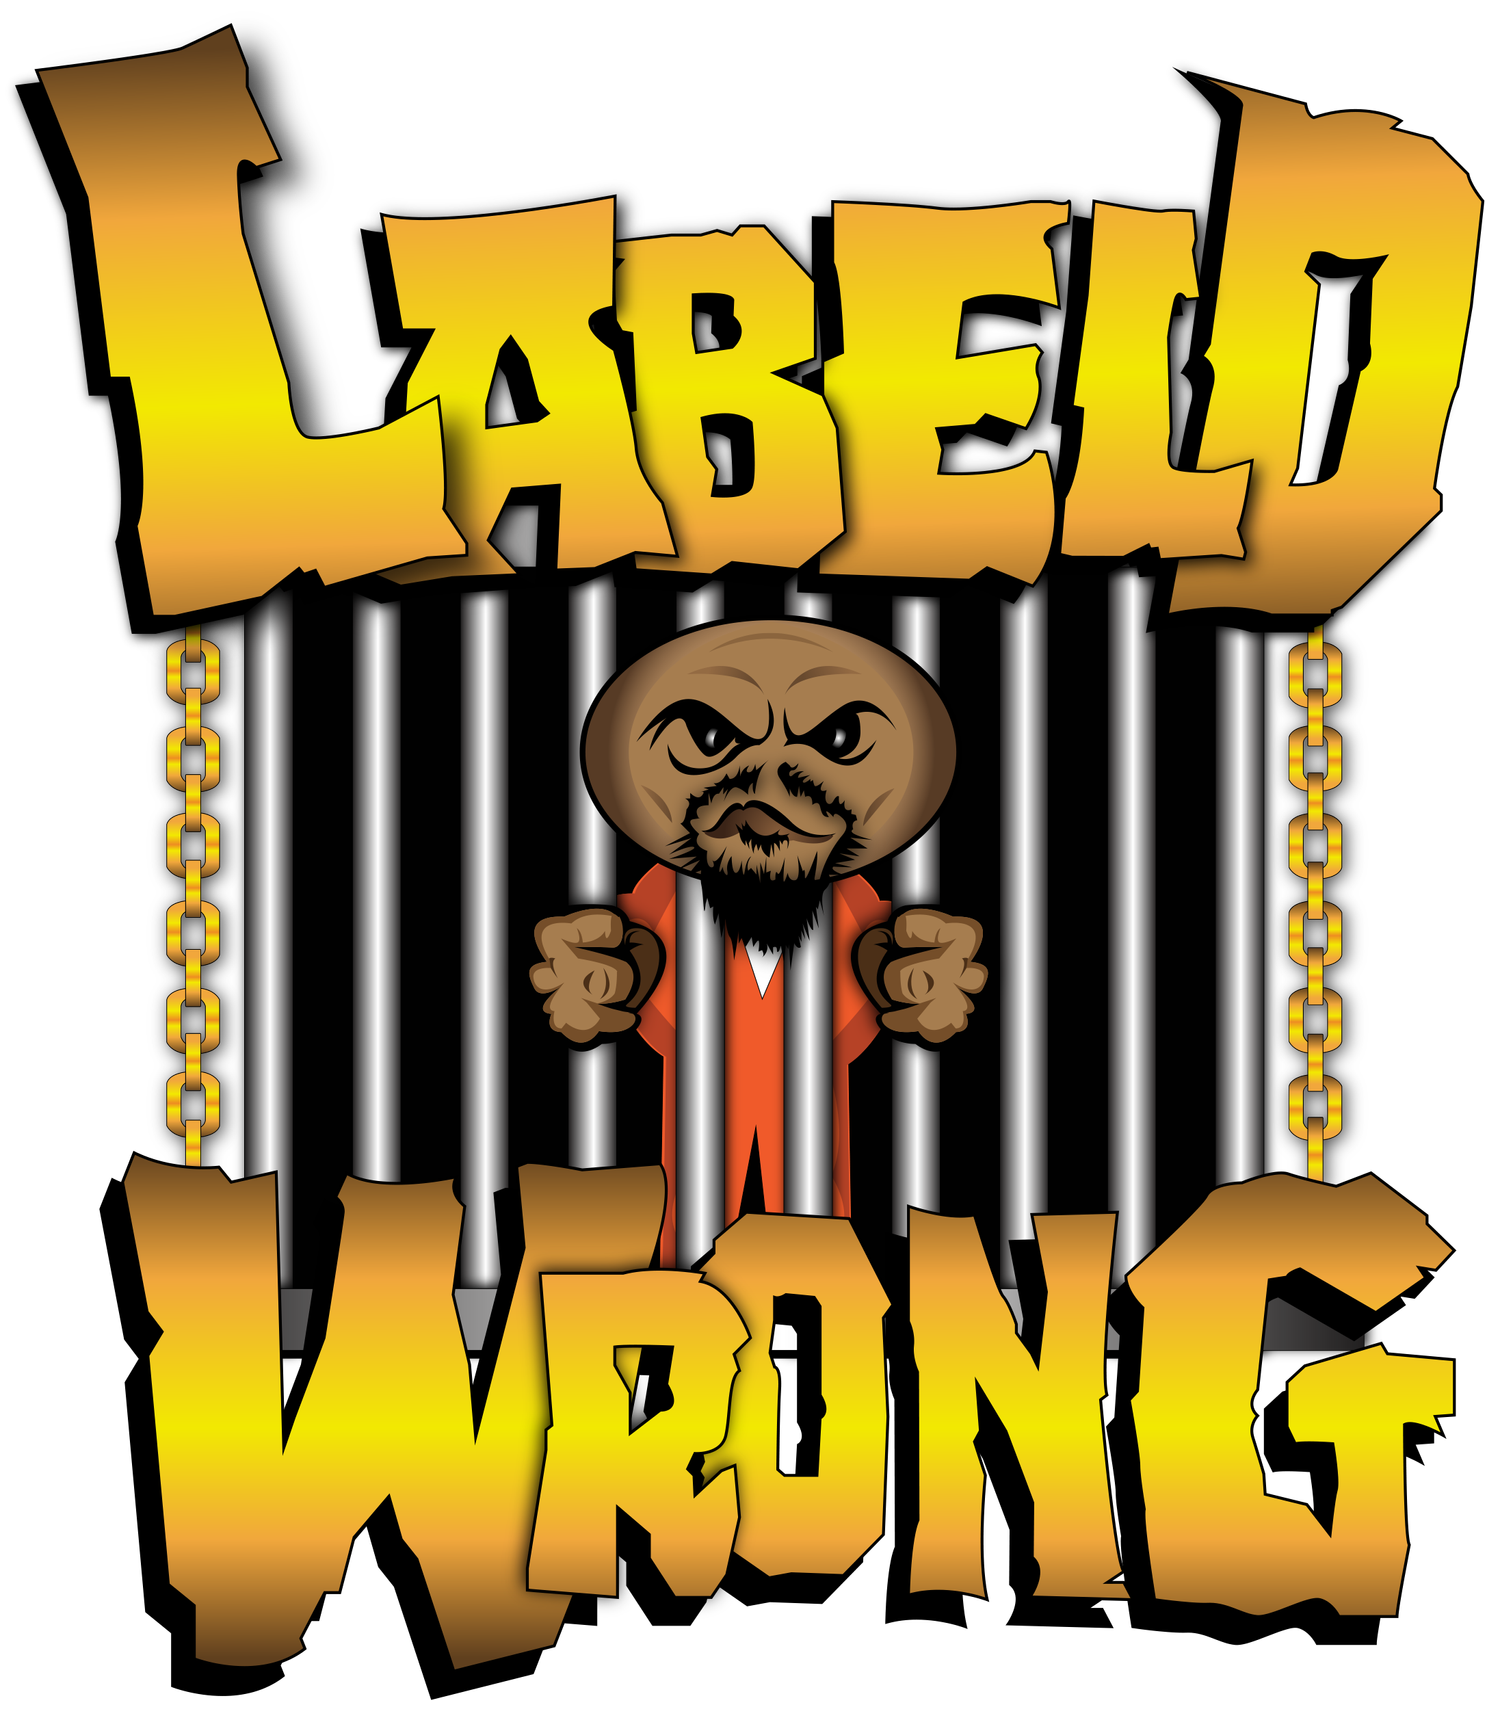 Labeld Wrong Records